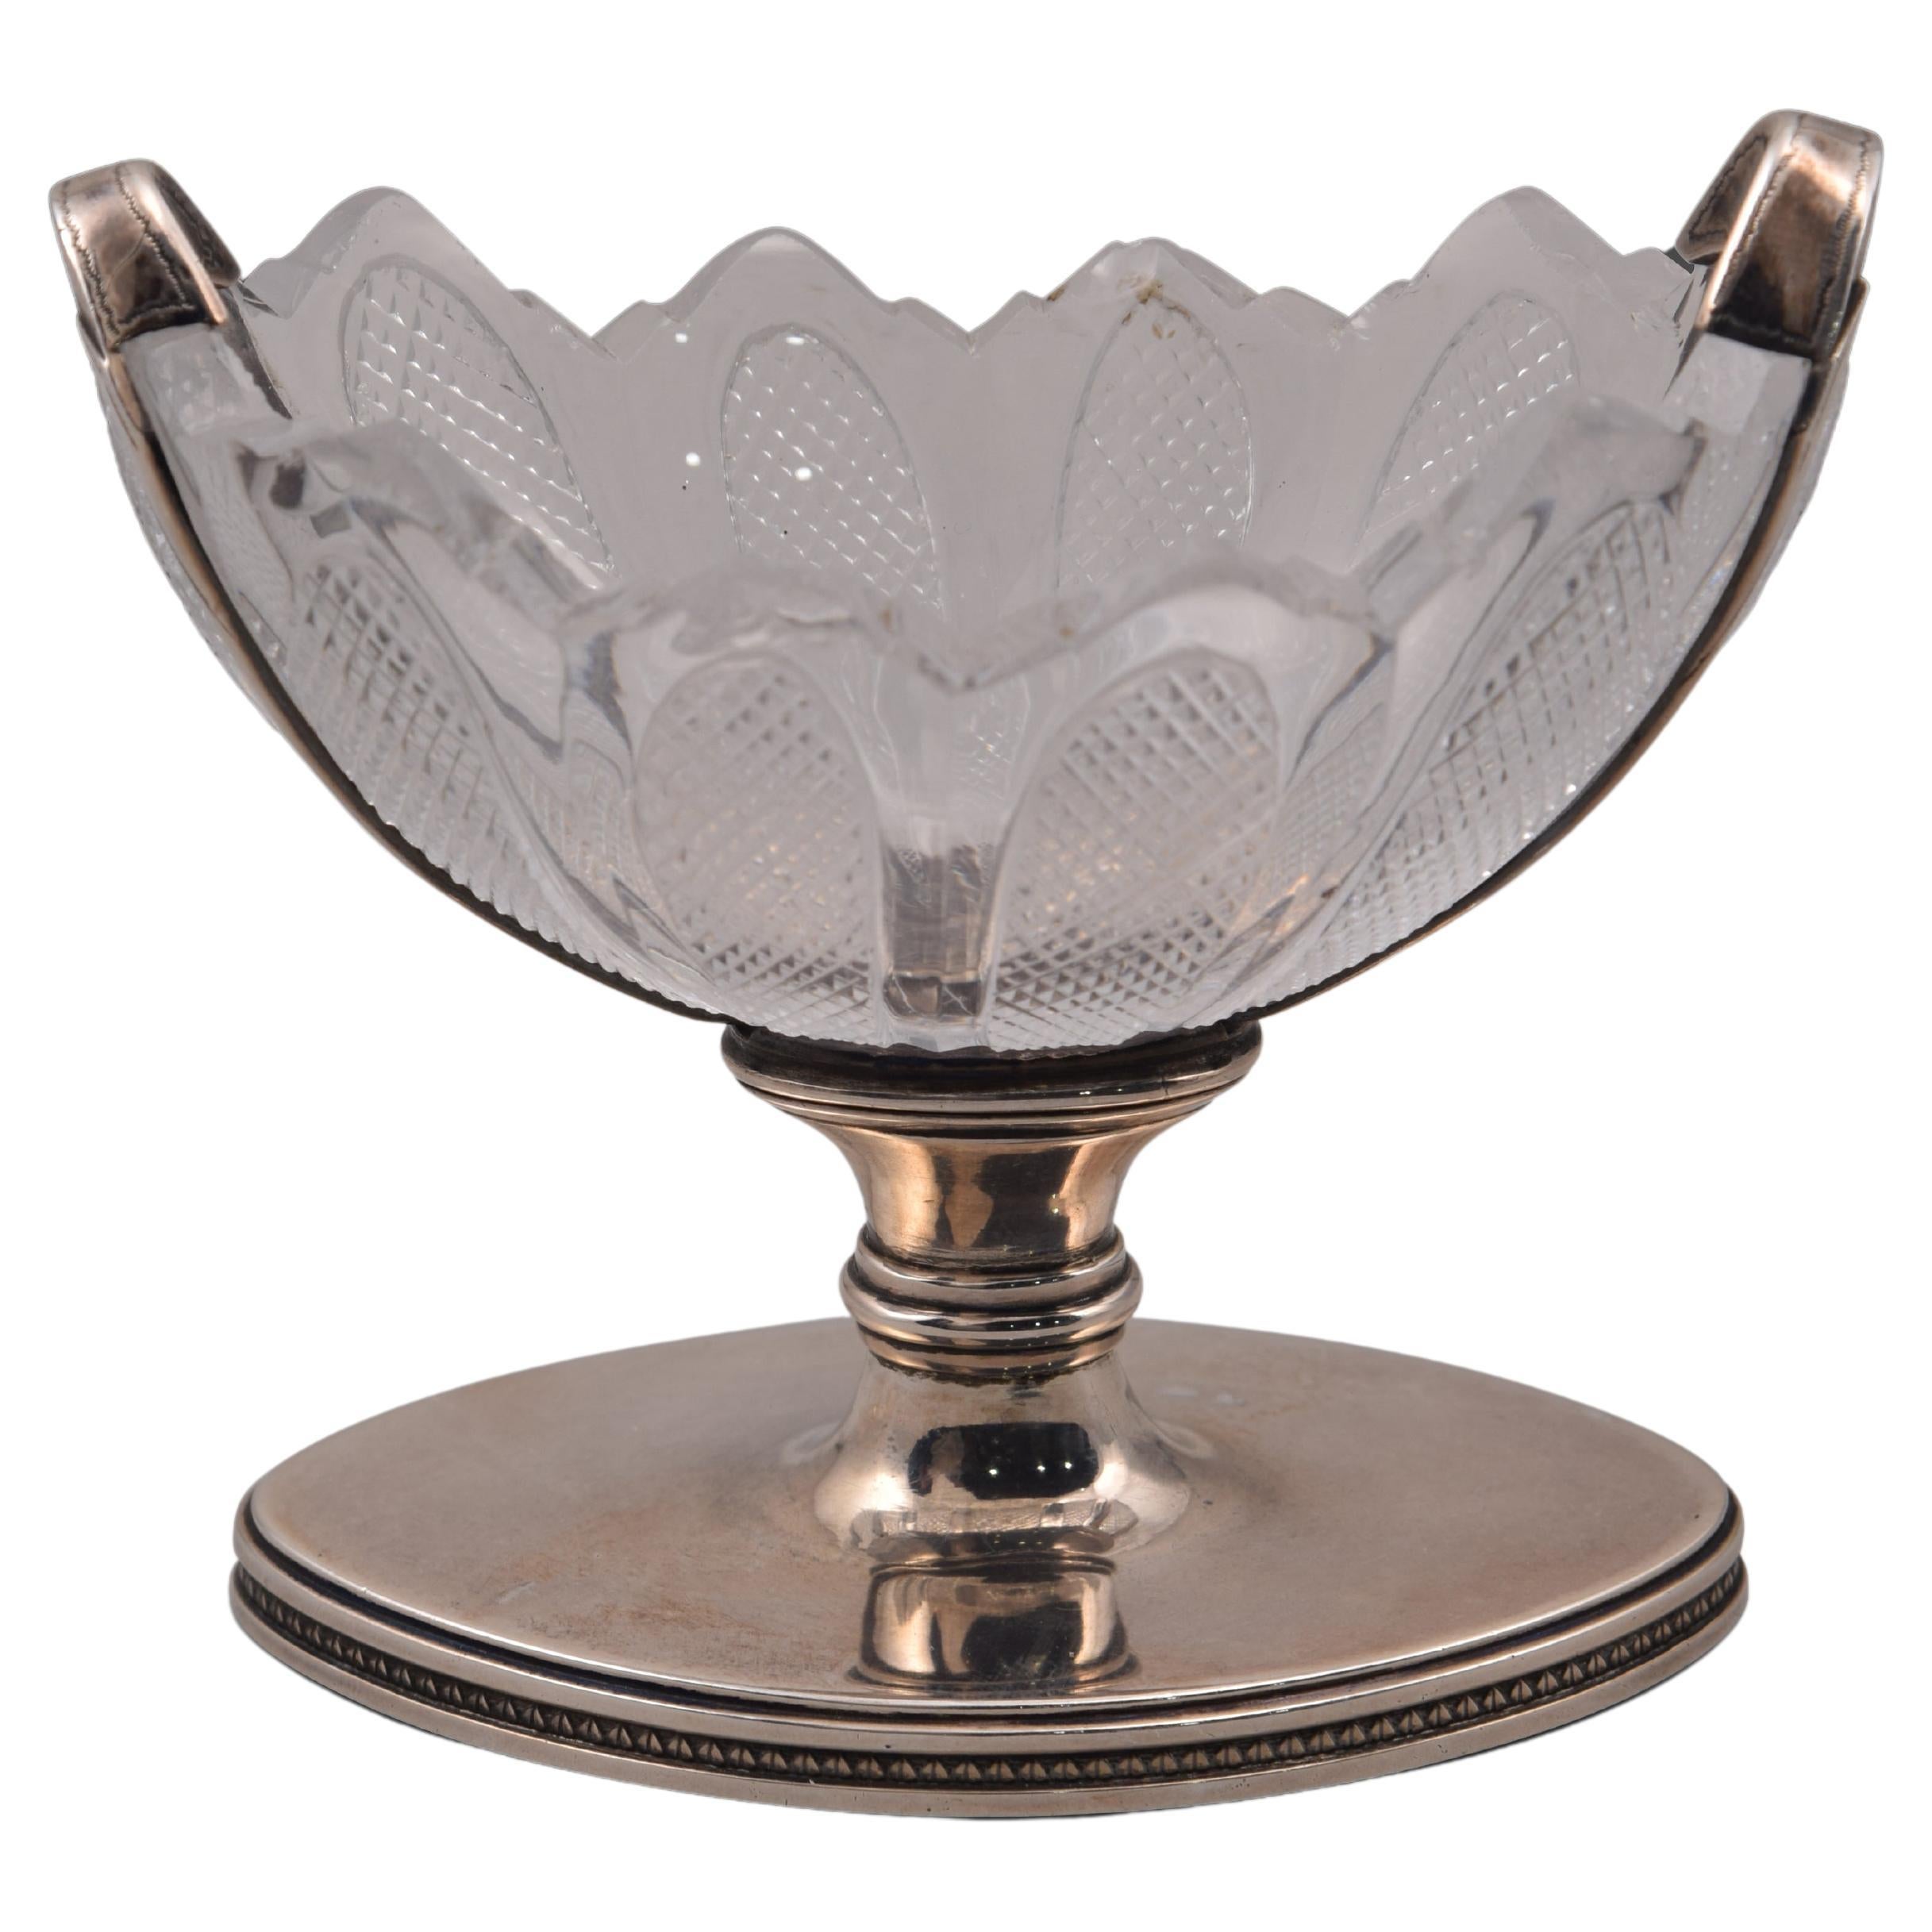 Silver and Glass Spice Dish or Bowl, 19th Century